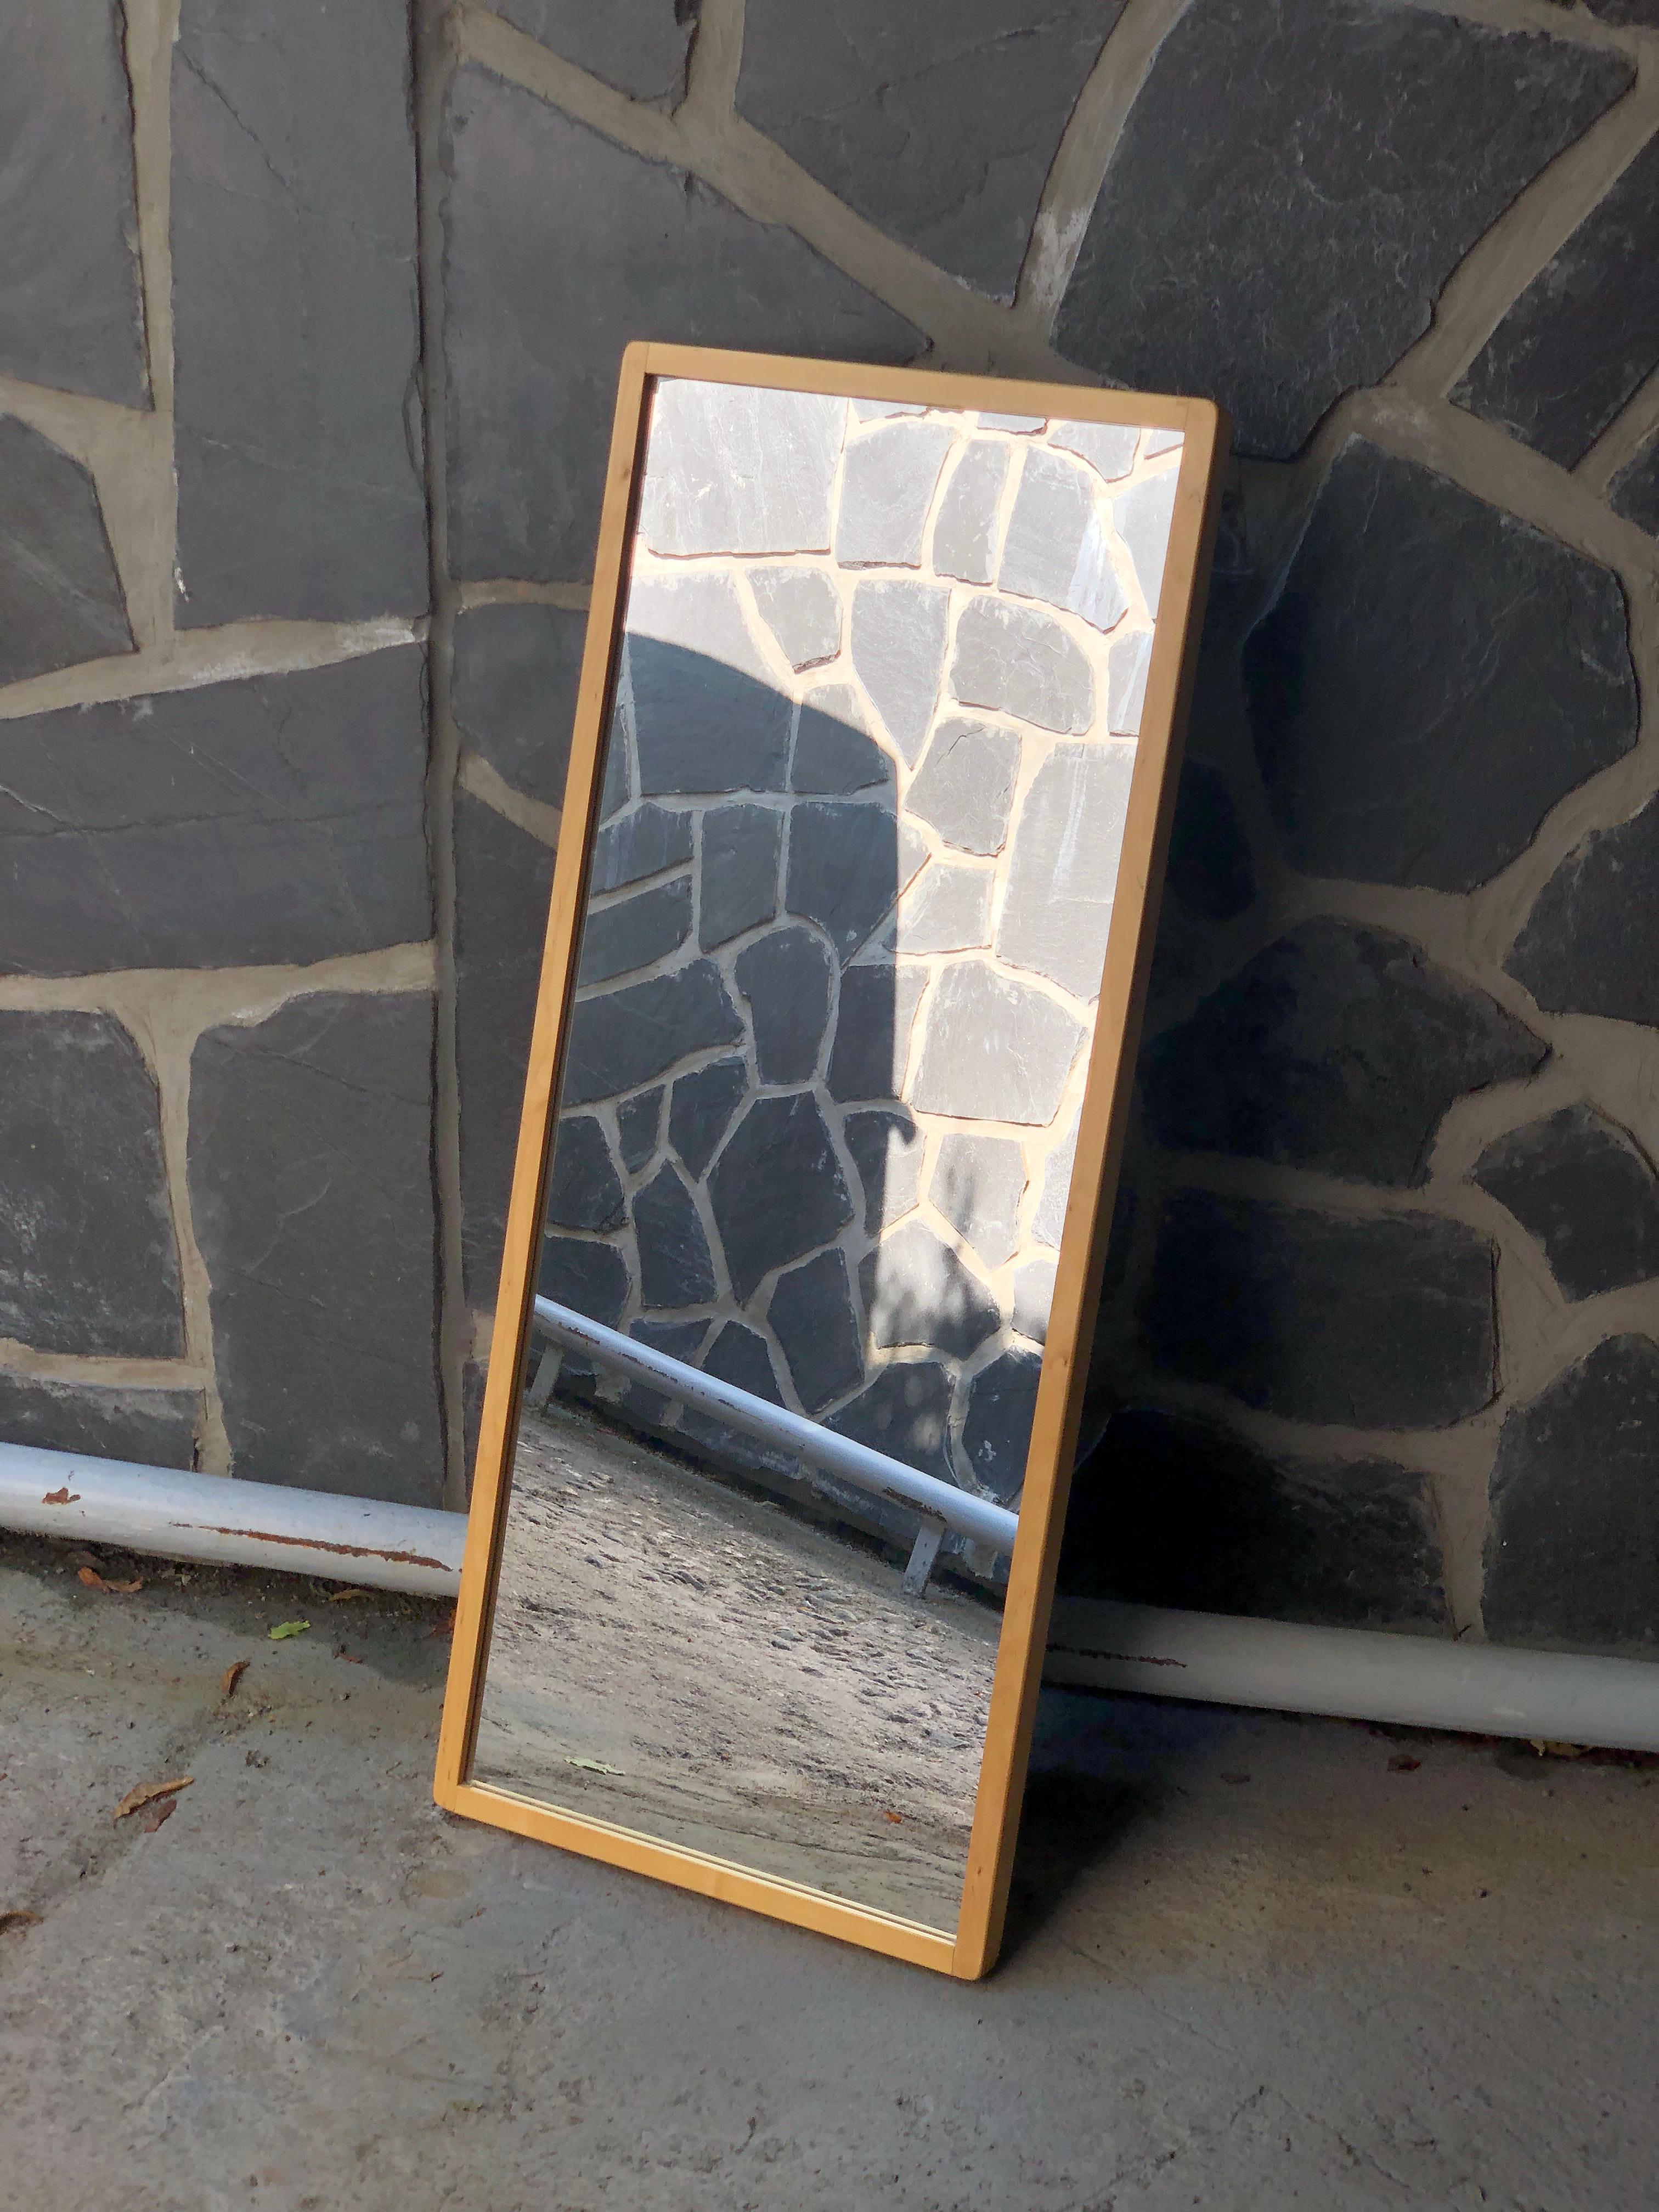 Iconic mirror designed by Alvar Aalto and manufactured by Artek in Finland. 

This mirror makes a great addition to any space, be it a bedroom,  office table, or an entrance. So simple yet so good looking and practical. It's in great orginal